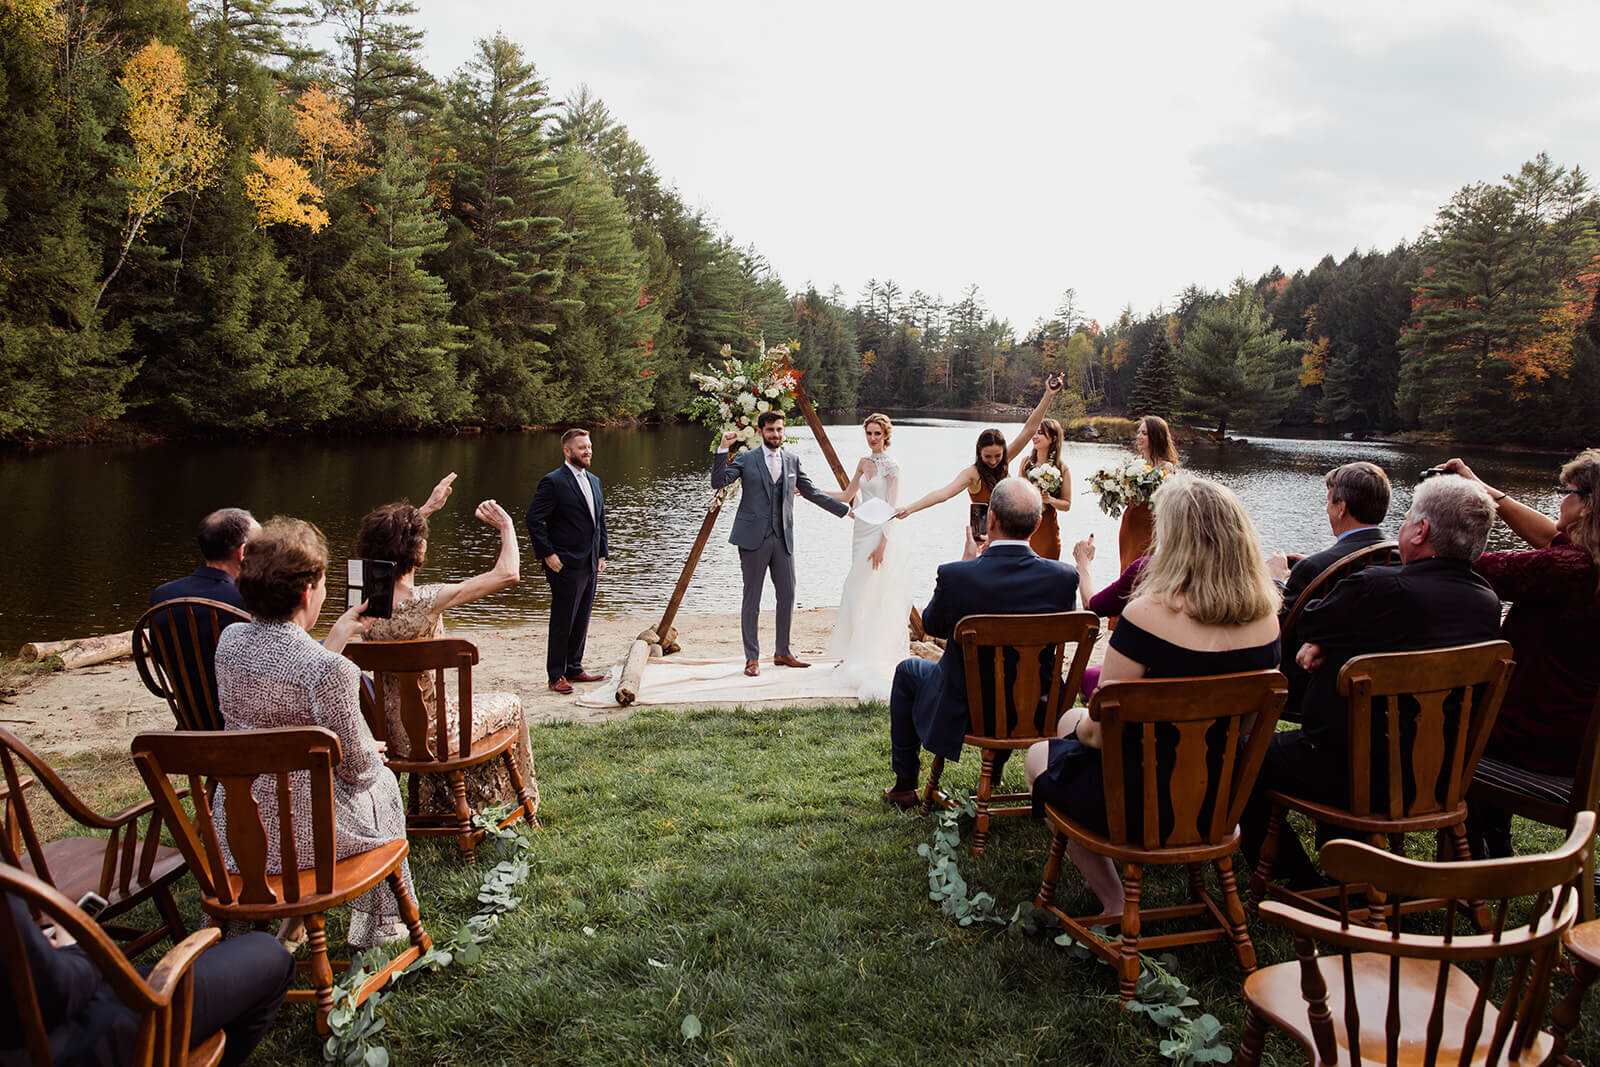  Small outdoor wedding on lake beach during the fall in the Adirondacks in Upstate New York. New York wedding packages. Upstate NY elopement packages. 